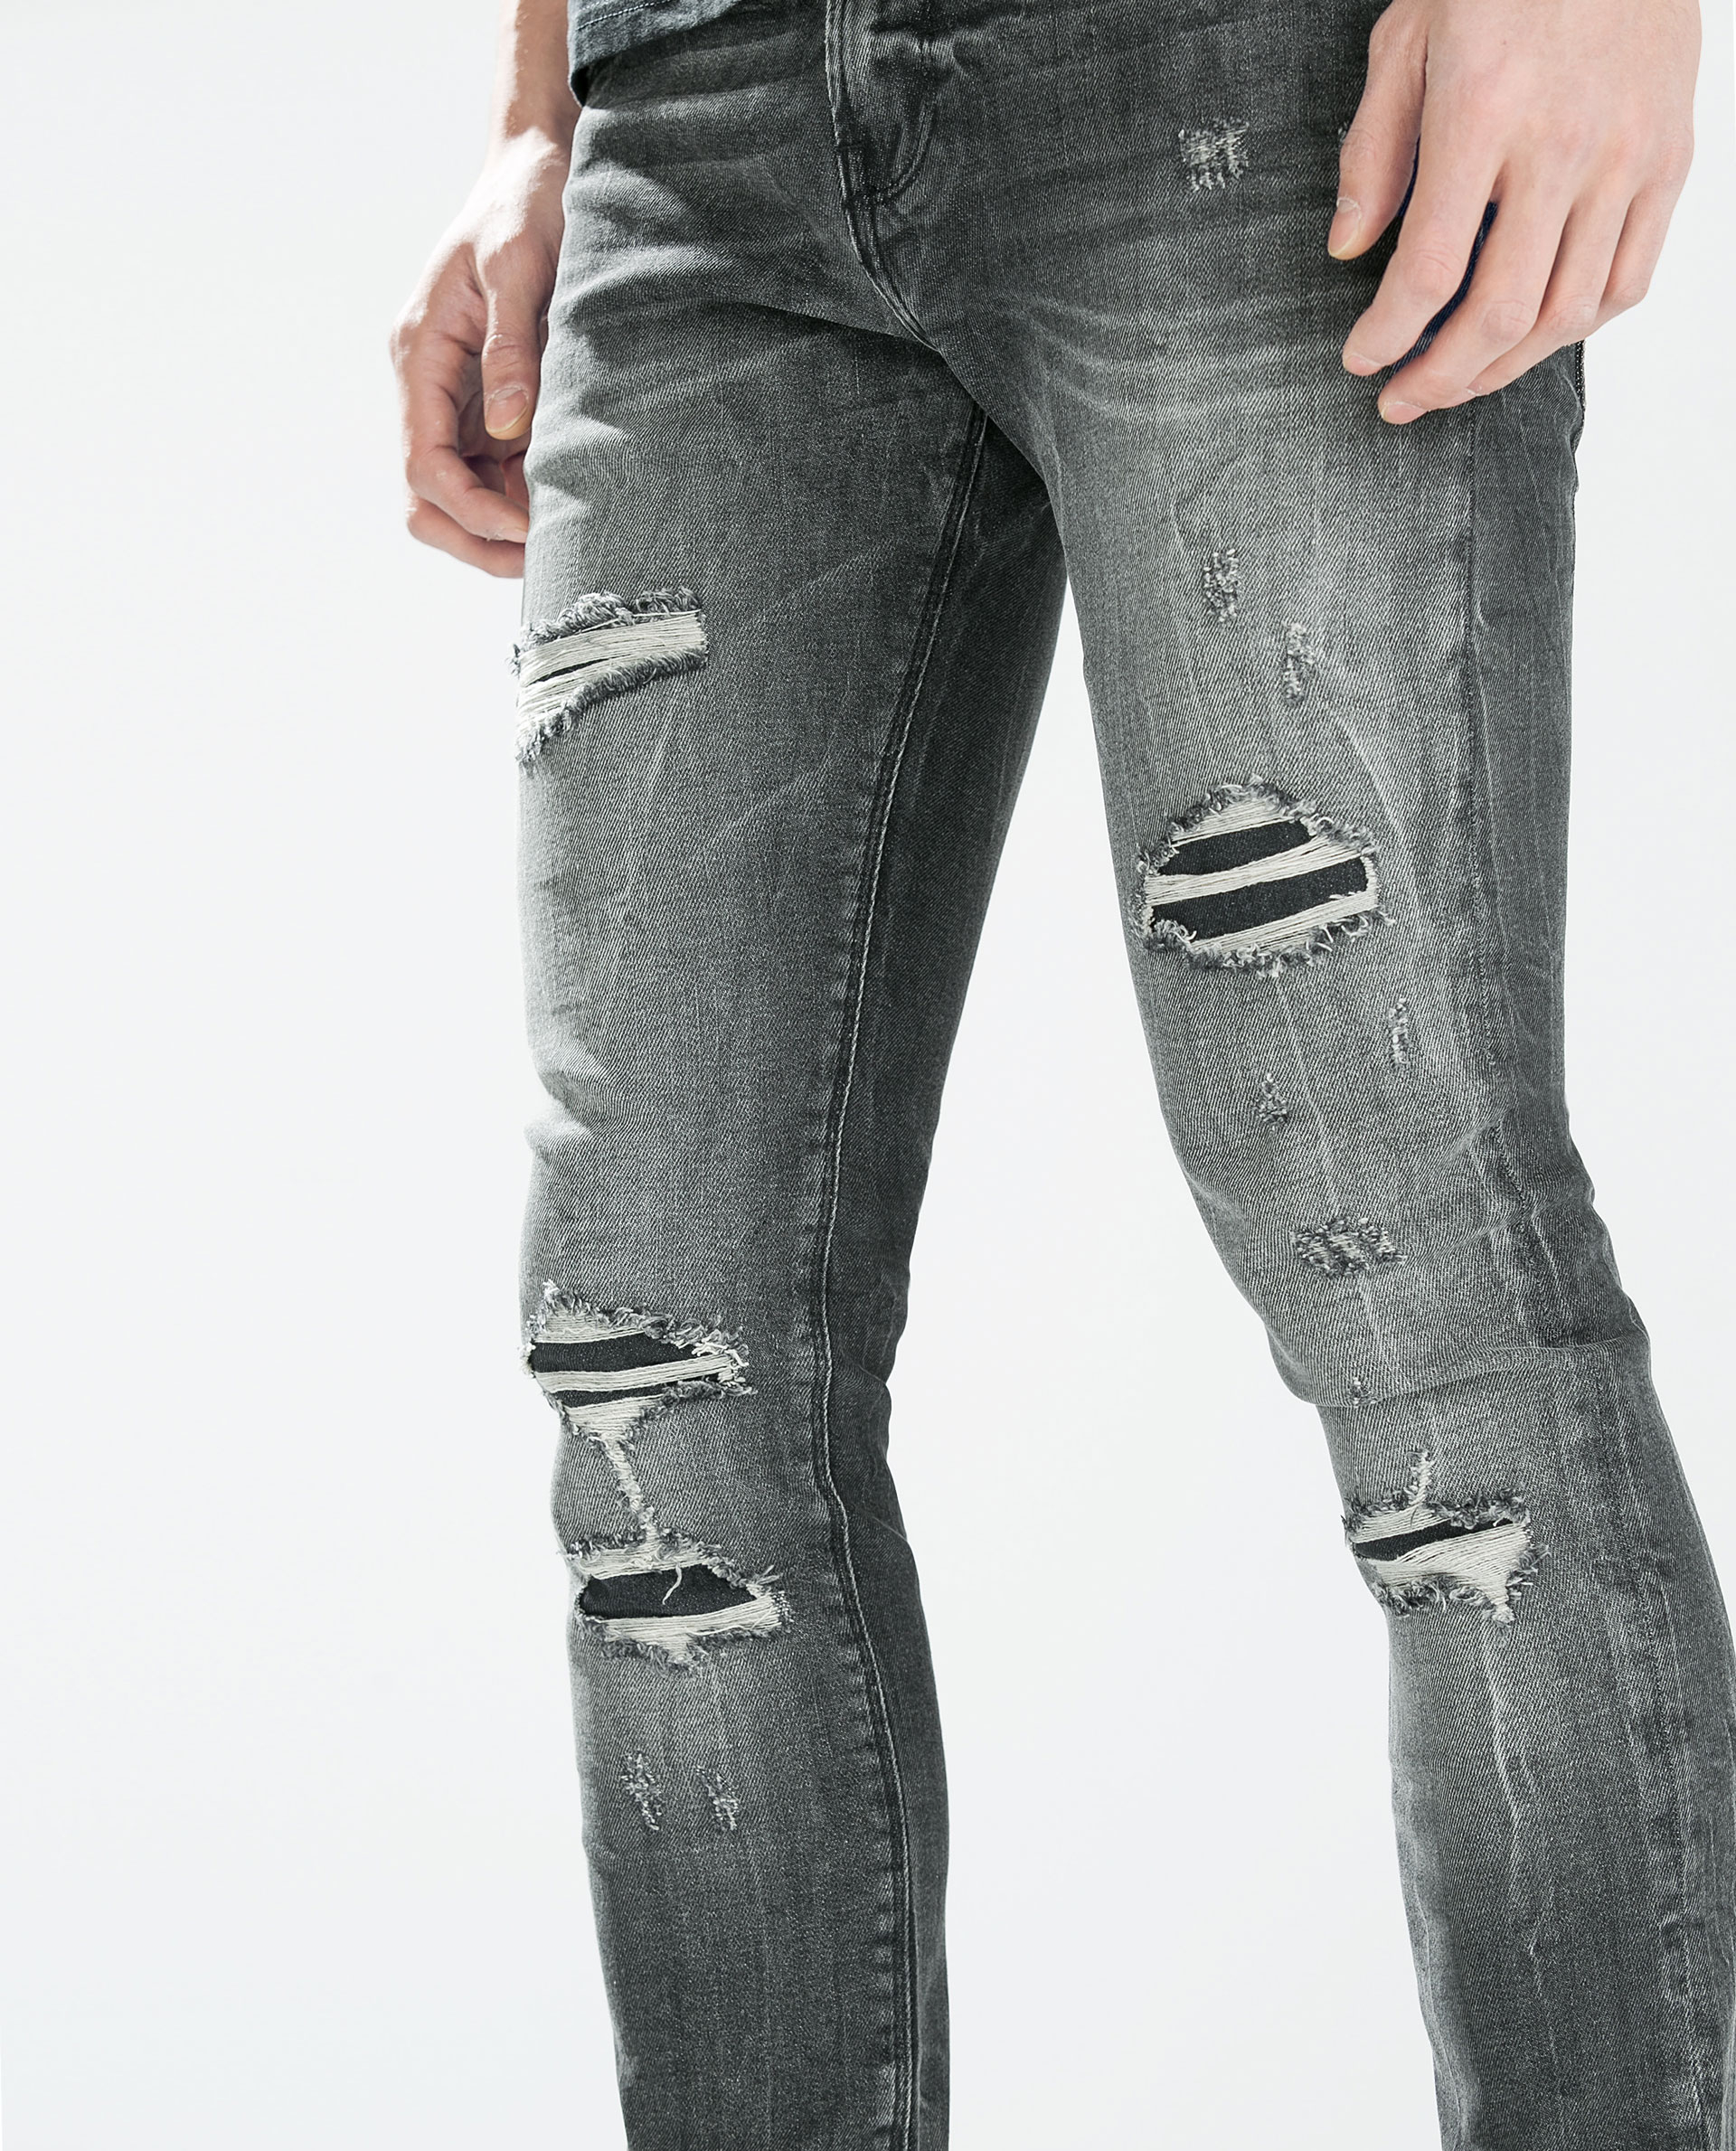 zara-gray-ripped-skinny-jeans-product-1-26251641-3-665195713-normal.jpeg